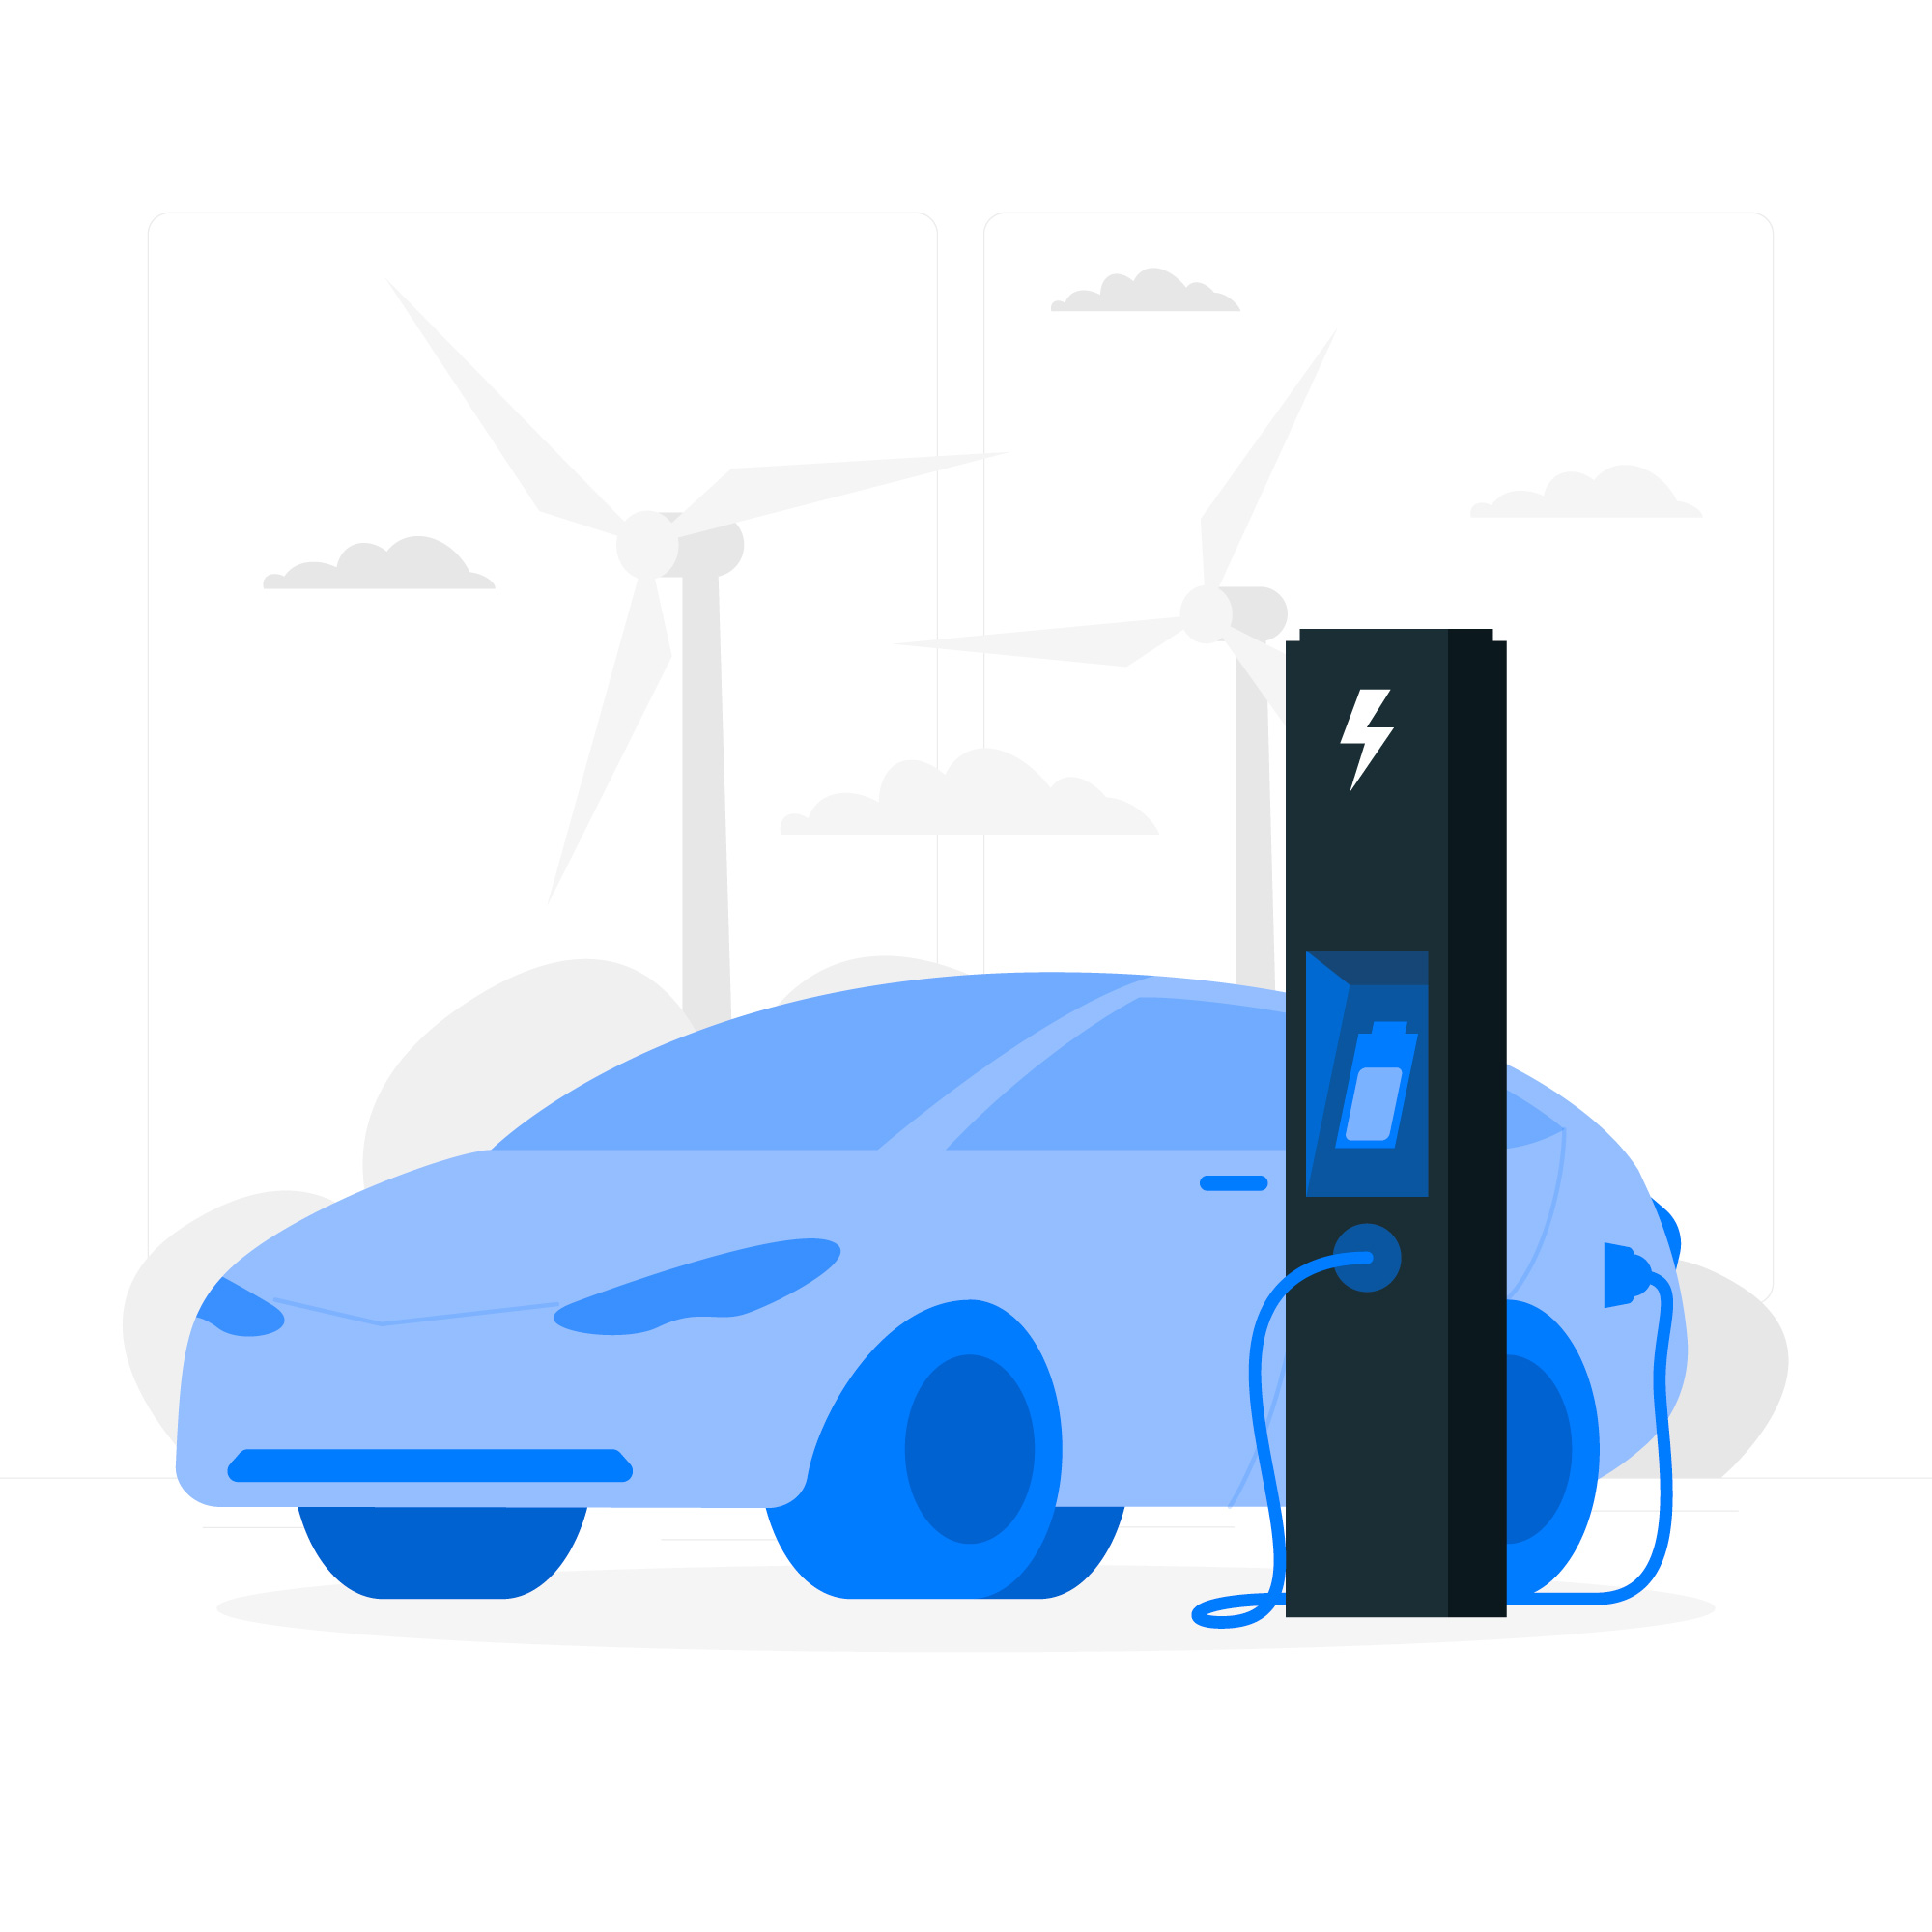 Technology Stack for IoT enabled Electric Vehicle Charging Station Management System - Part 1